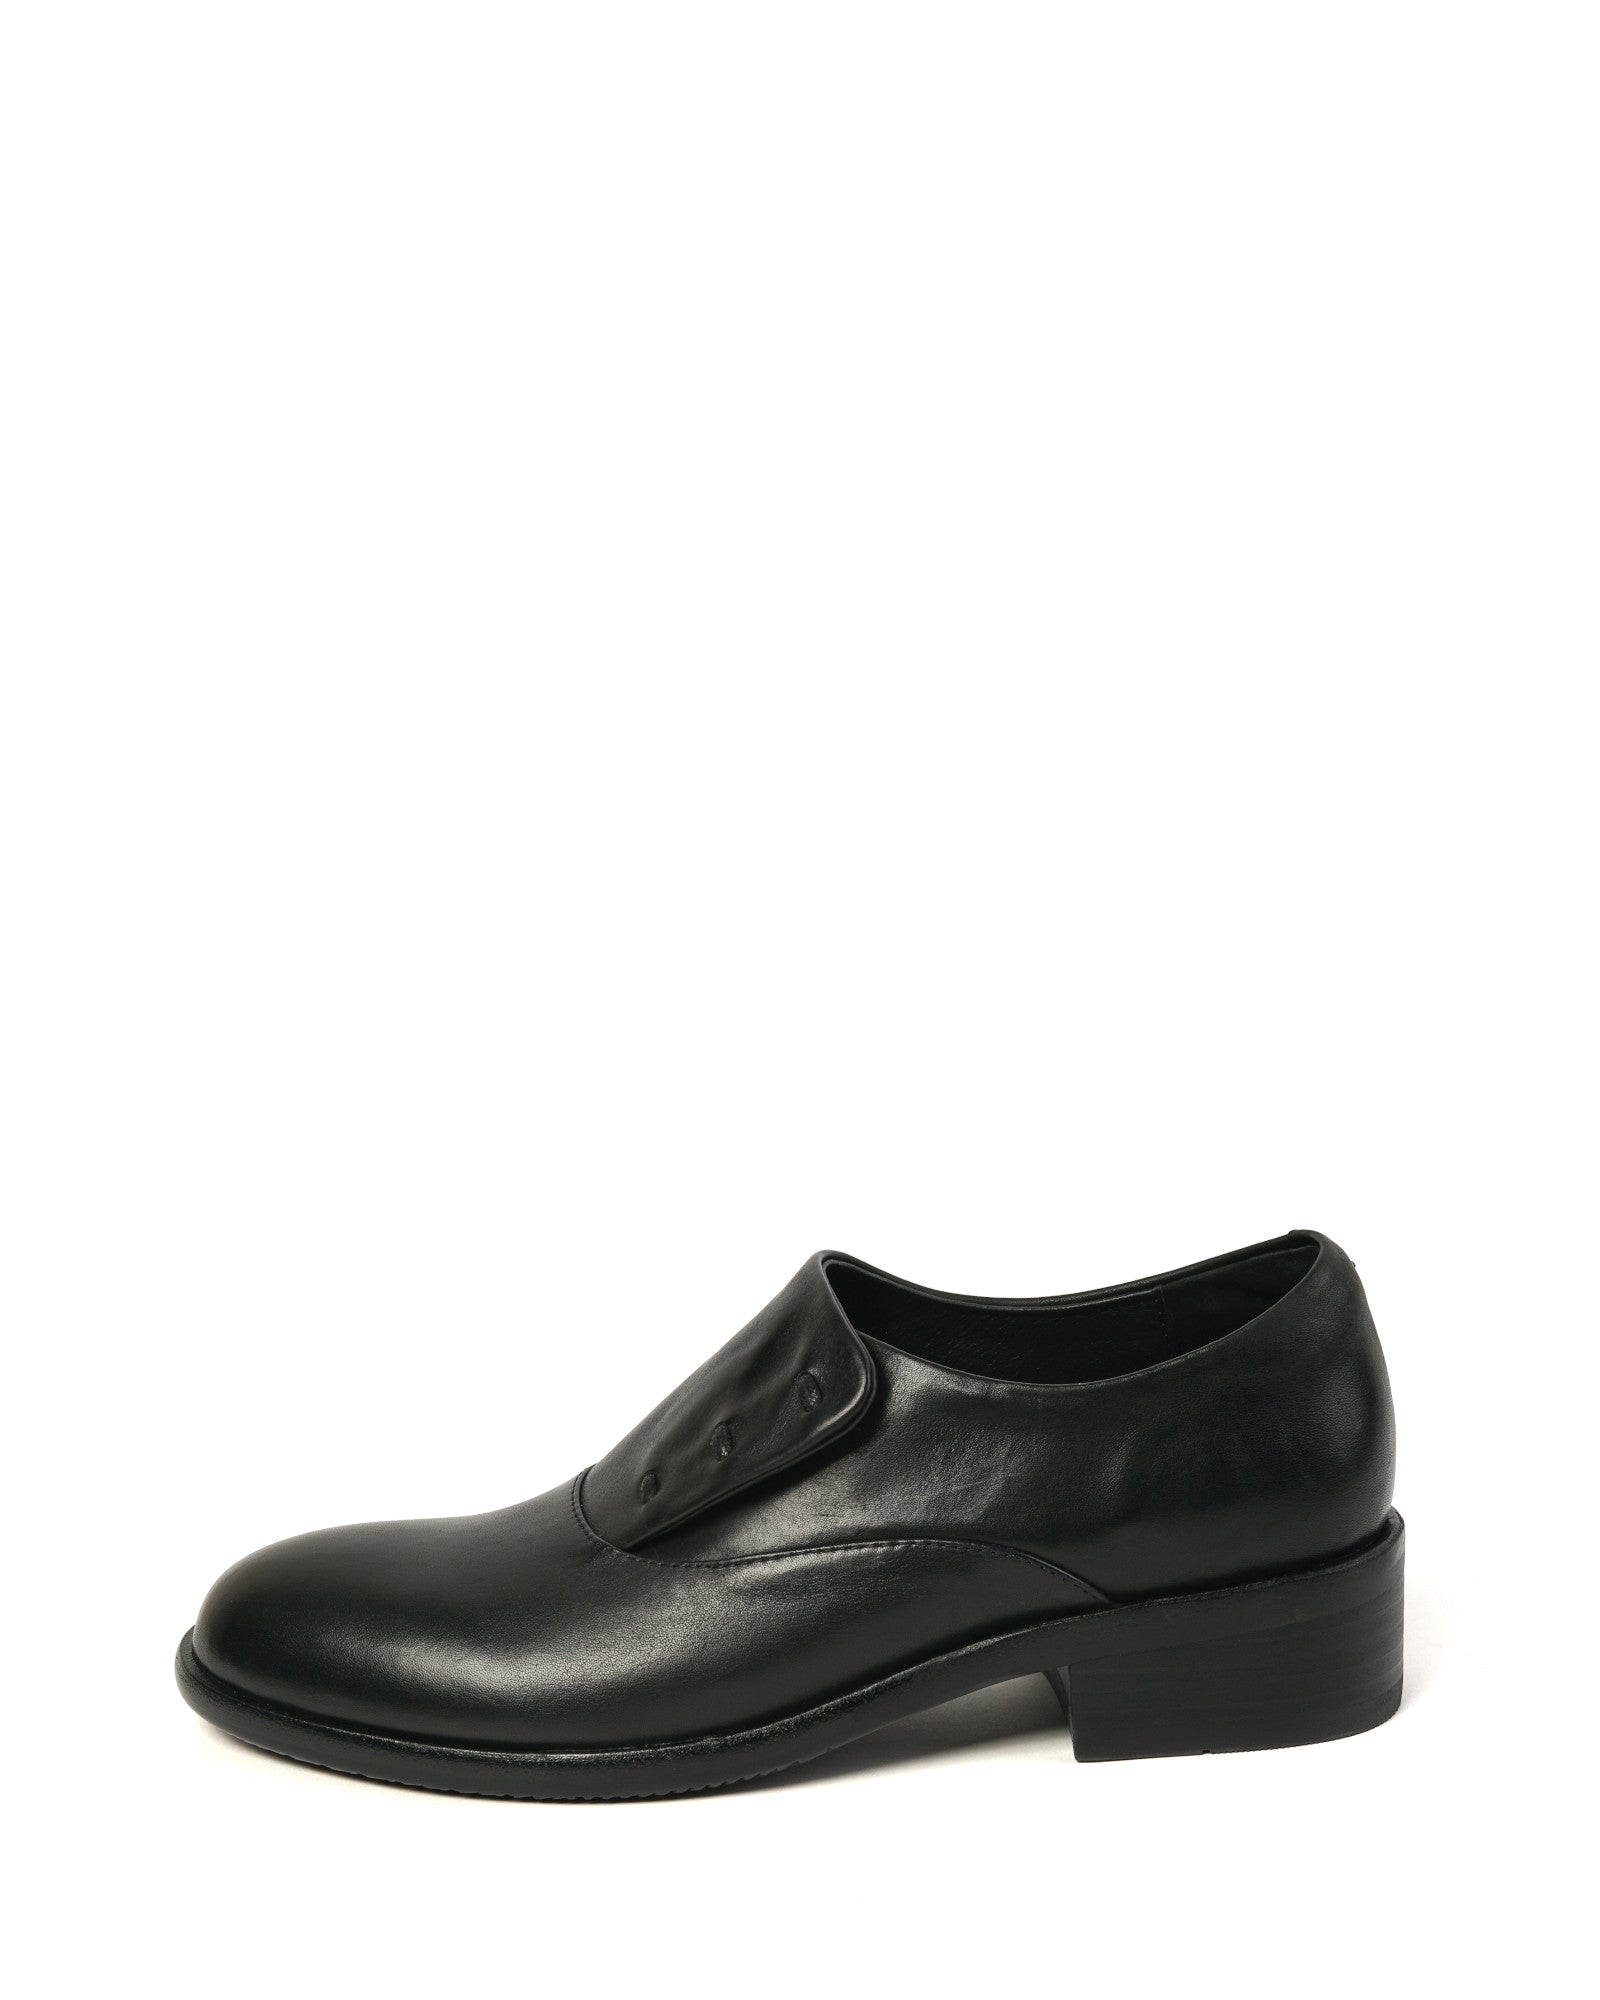 Korio-monk-style-leather-loafers-black-1